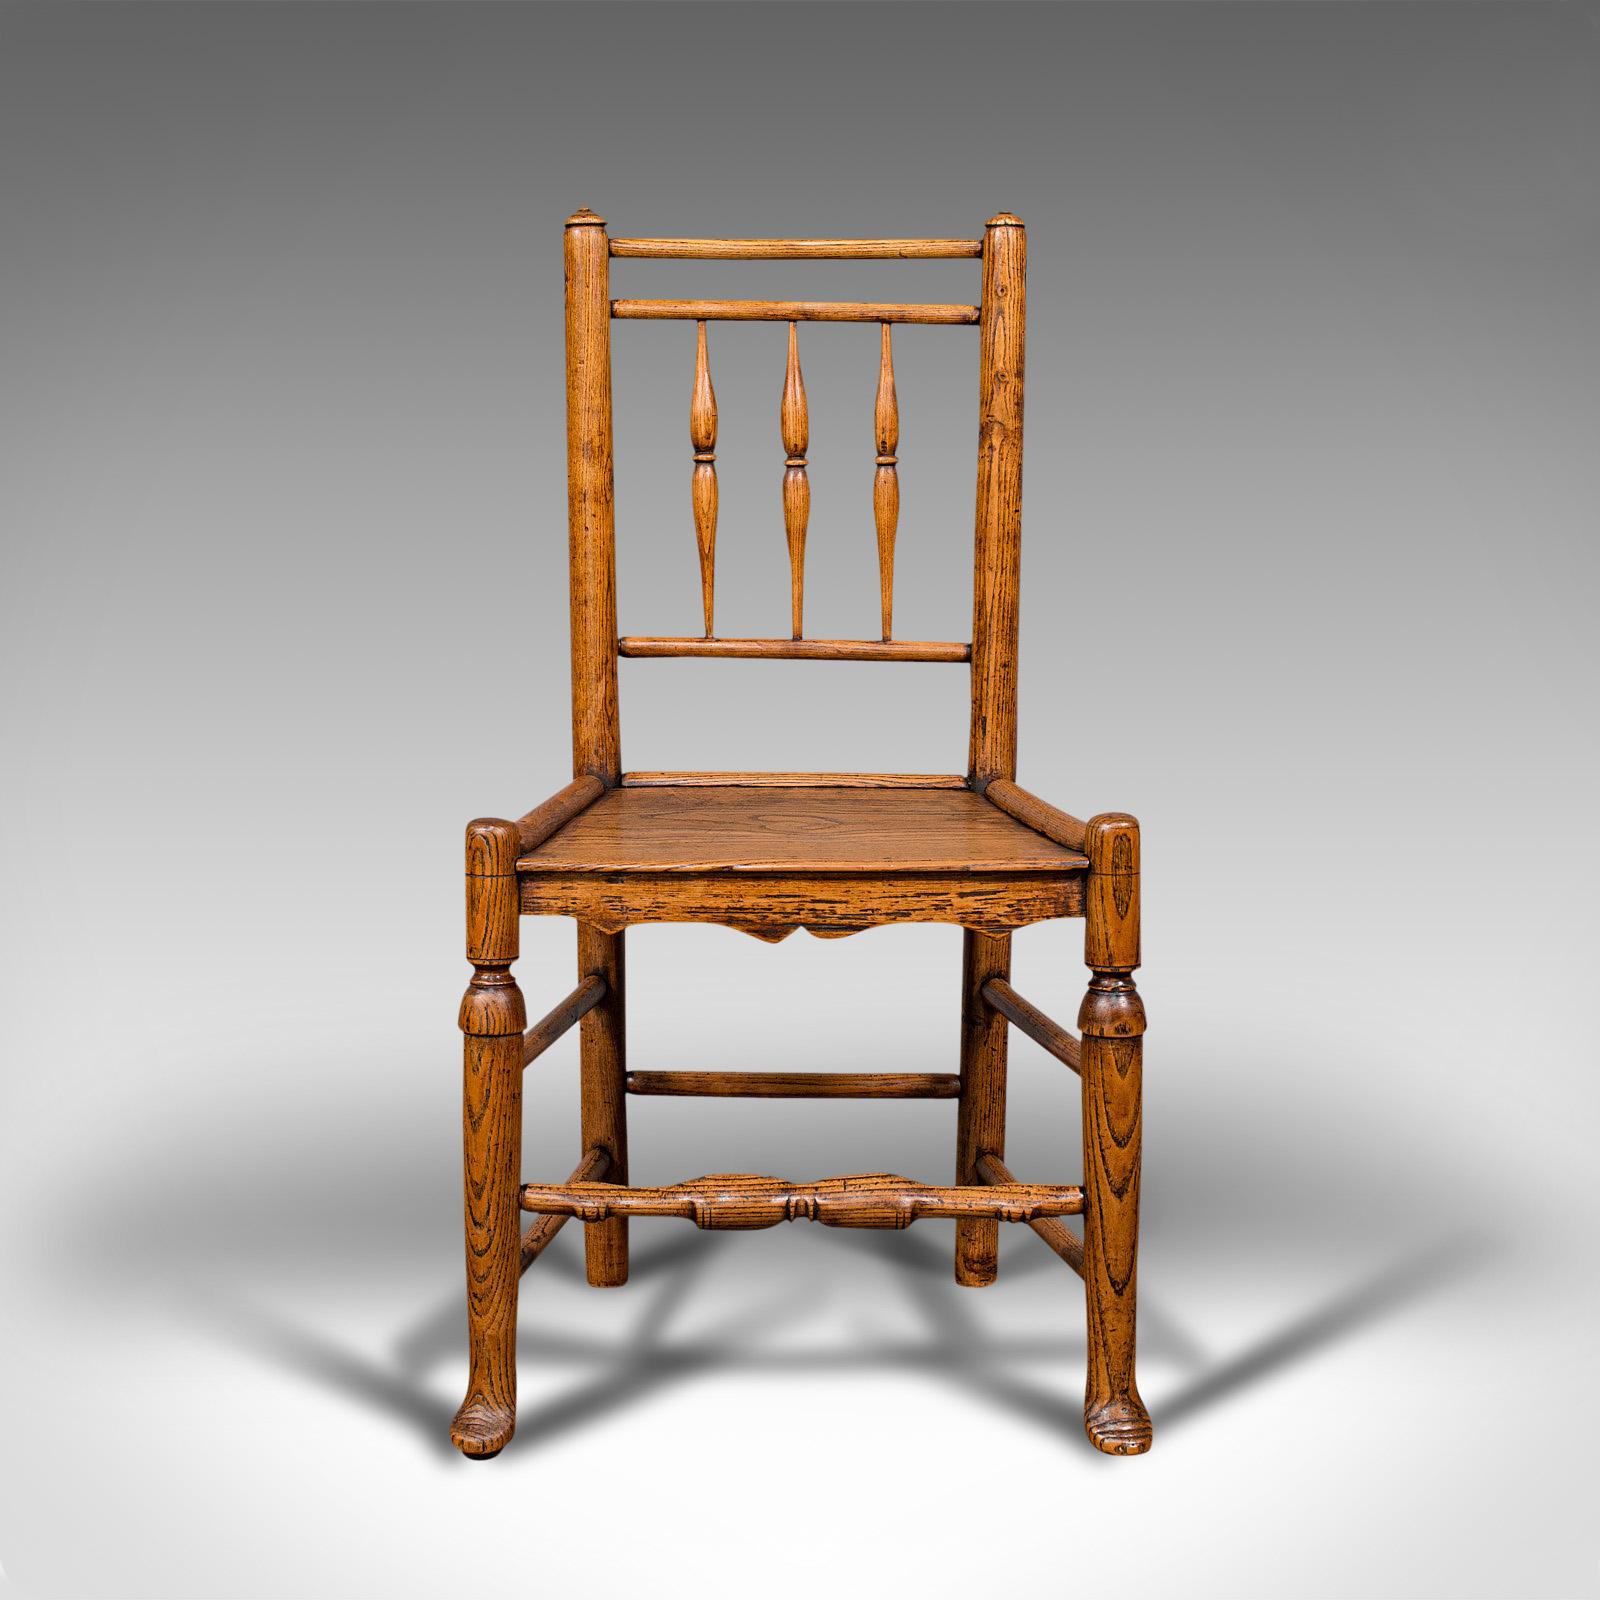 This is a small antique tanner's chair. An English, ash and elm spindle back countryhouse craftsman's seat, dating to the early Victorian period, circa 1850.

Delightfully diminutive work seat
Displaying a desirable aged patina and in good